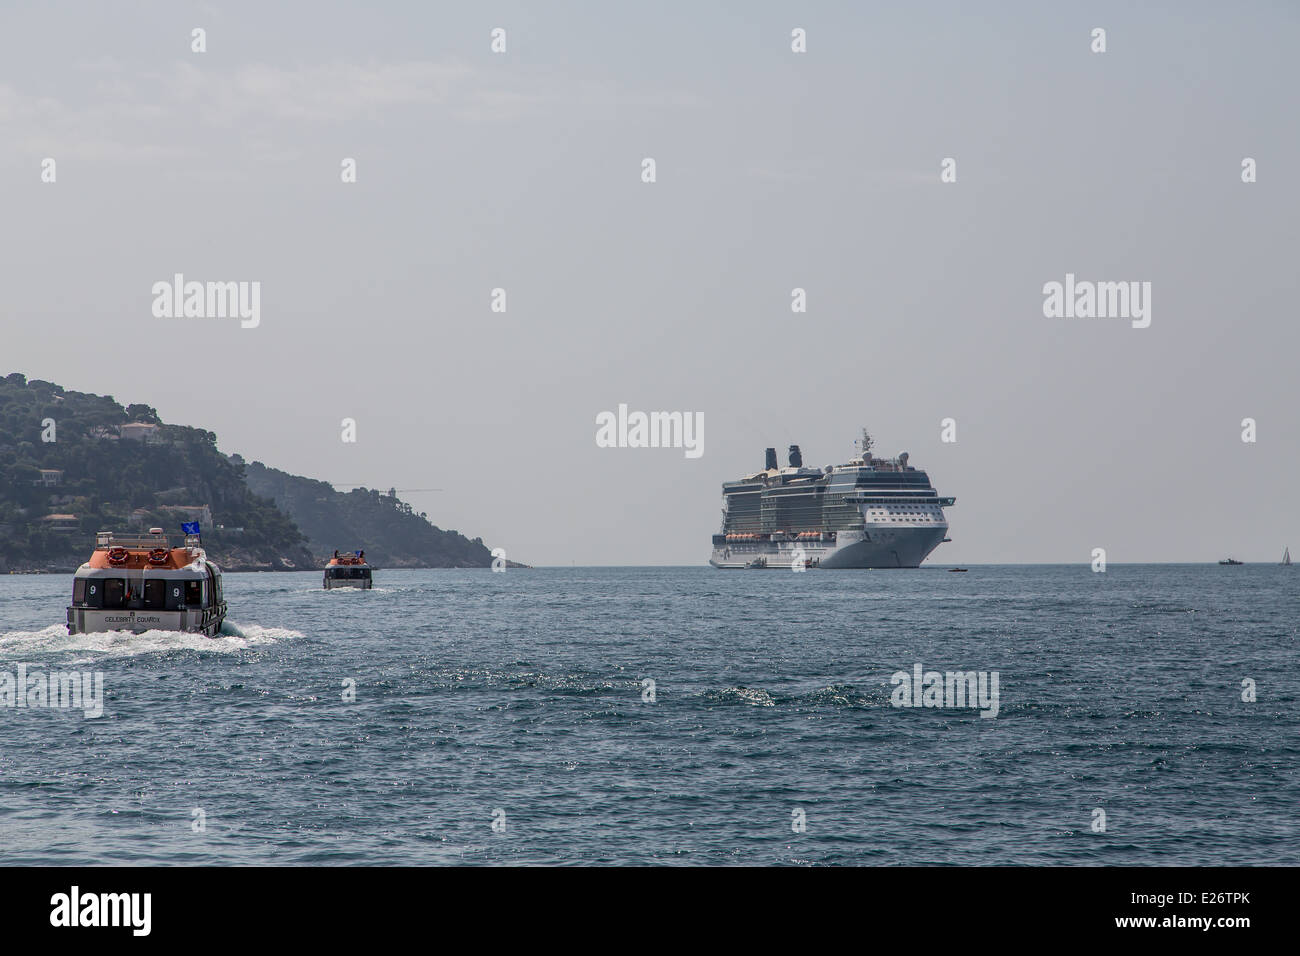 Lifeboats shuttling passengers to a cruise ship Stock Photo